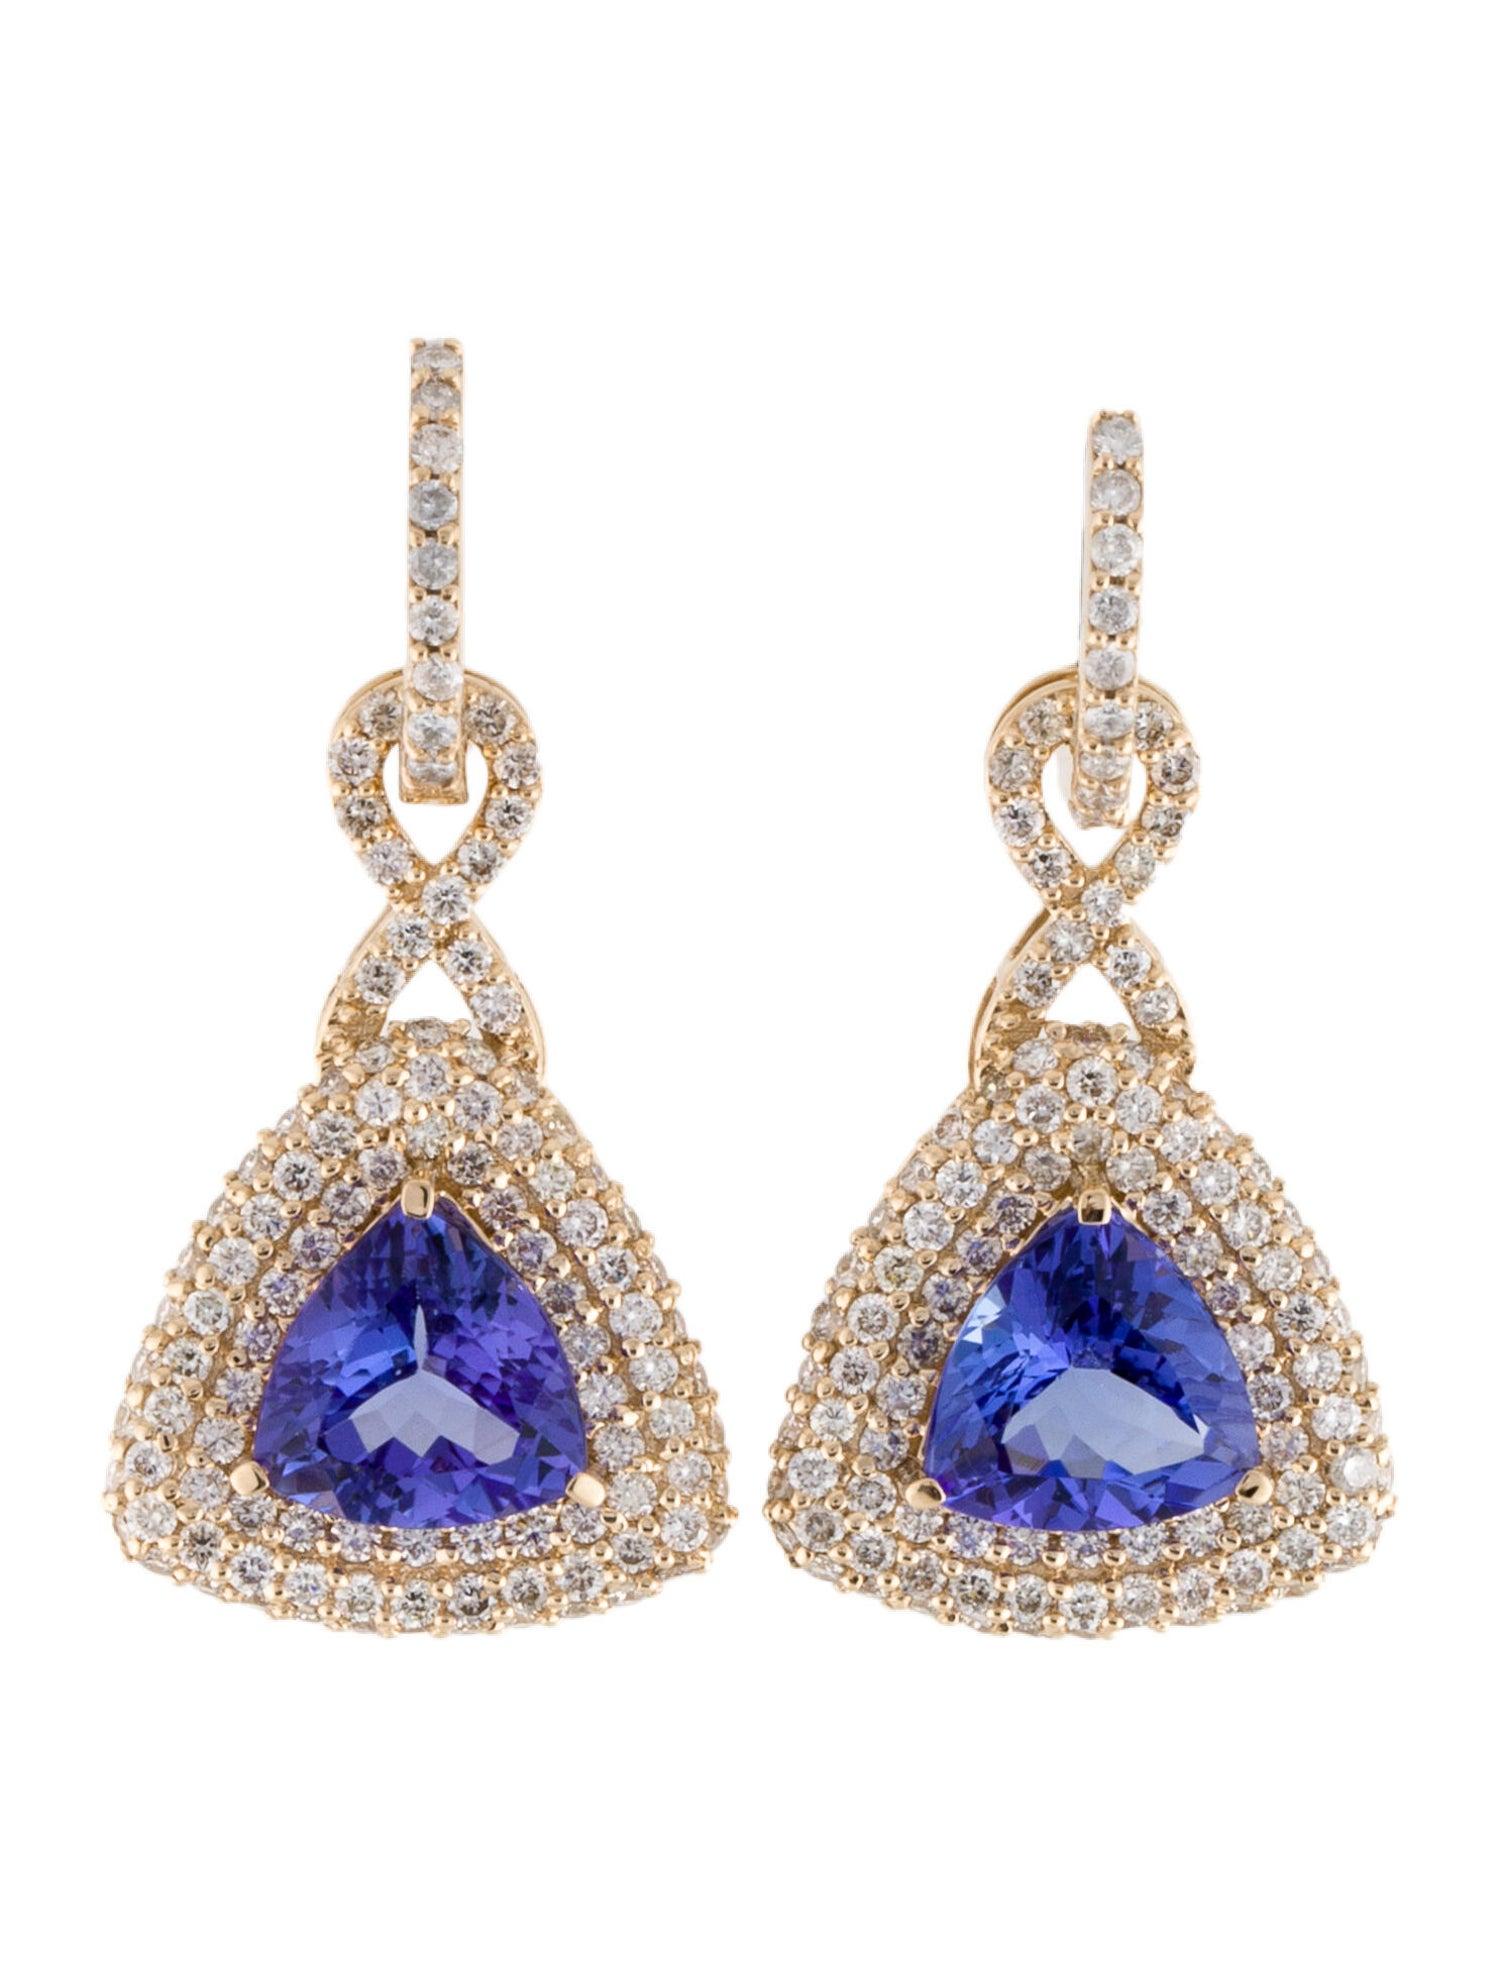 Introducing The Beauty of the Night Sky, our premium tanzanite collection that captures the essence of the exquisite night sky. The Starry Night Tanzanite and Diamond Earrings are a celestial masterpiece, handcrafted with the finest tanzanites,